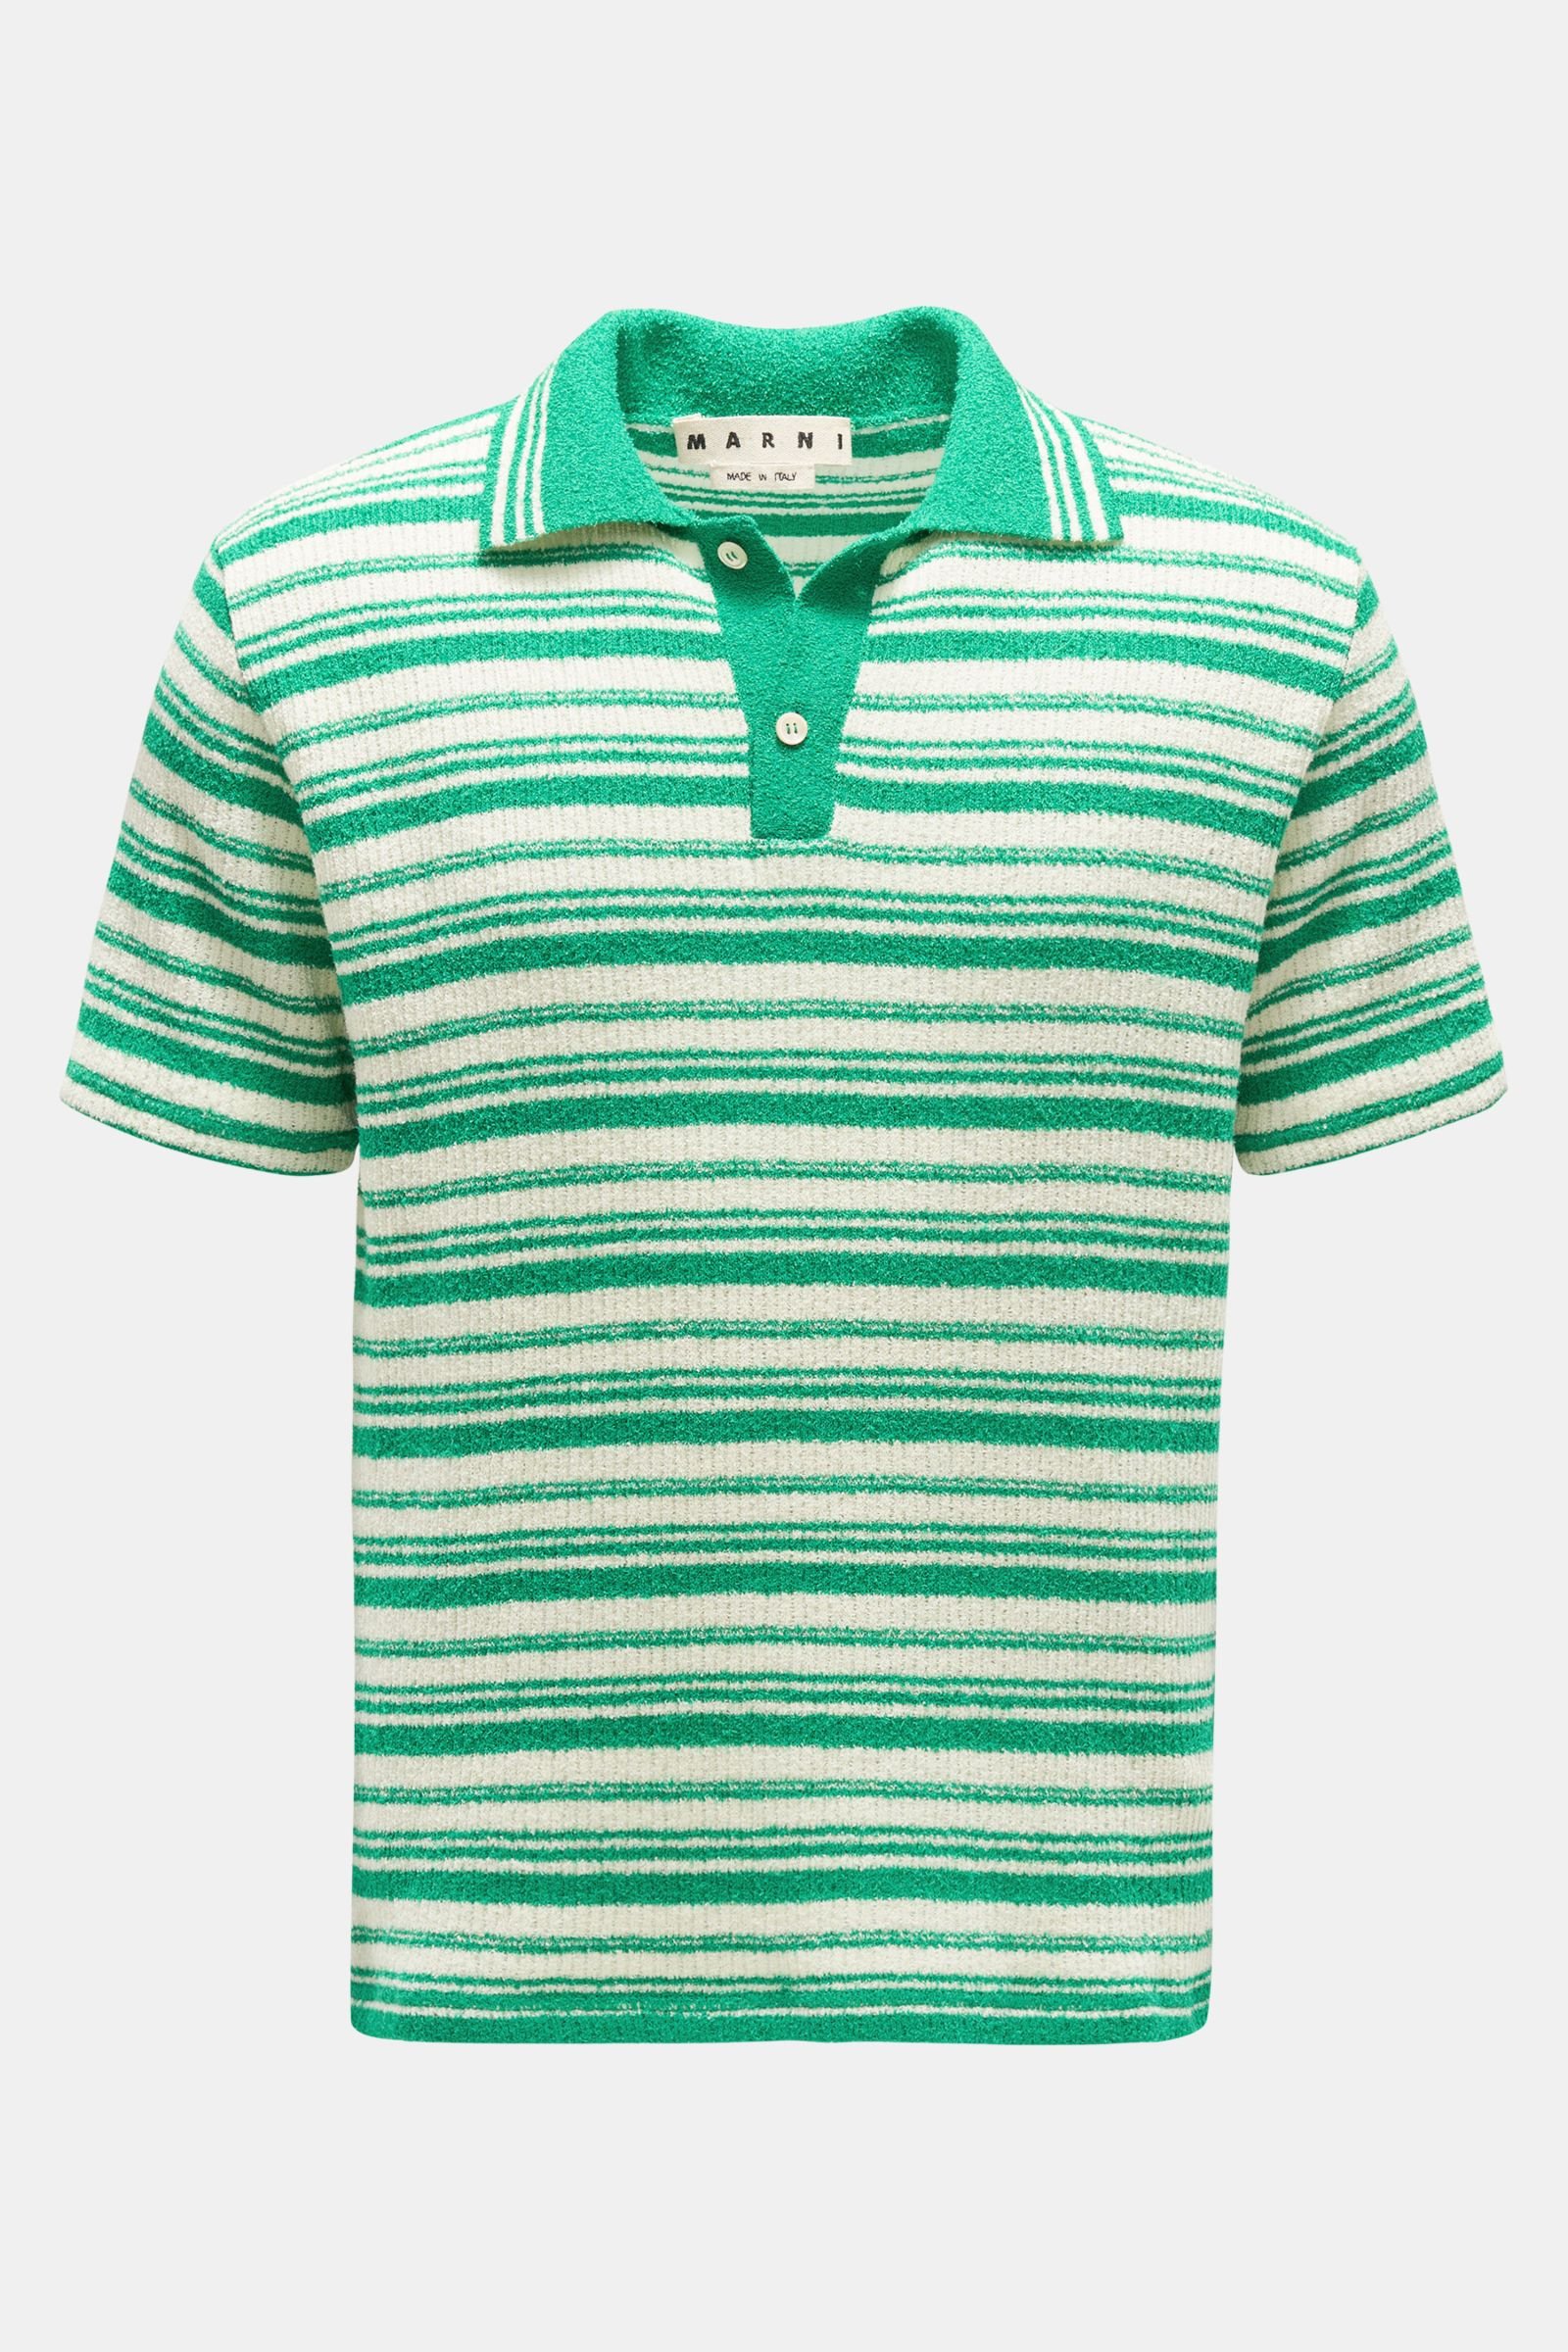 Short sleeve knit polo green/off-white striped